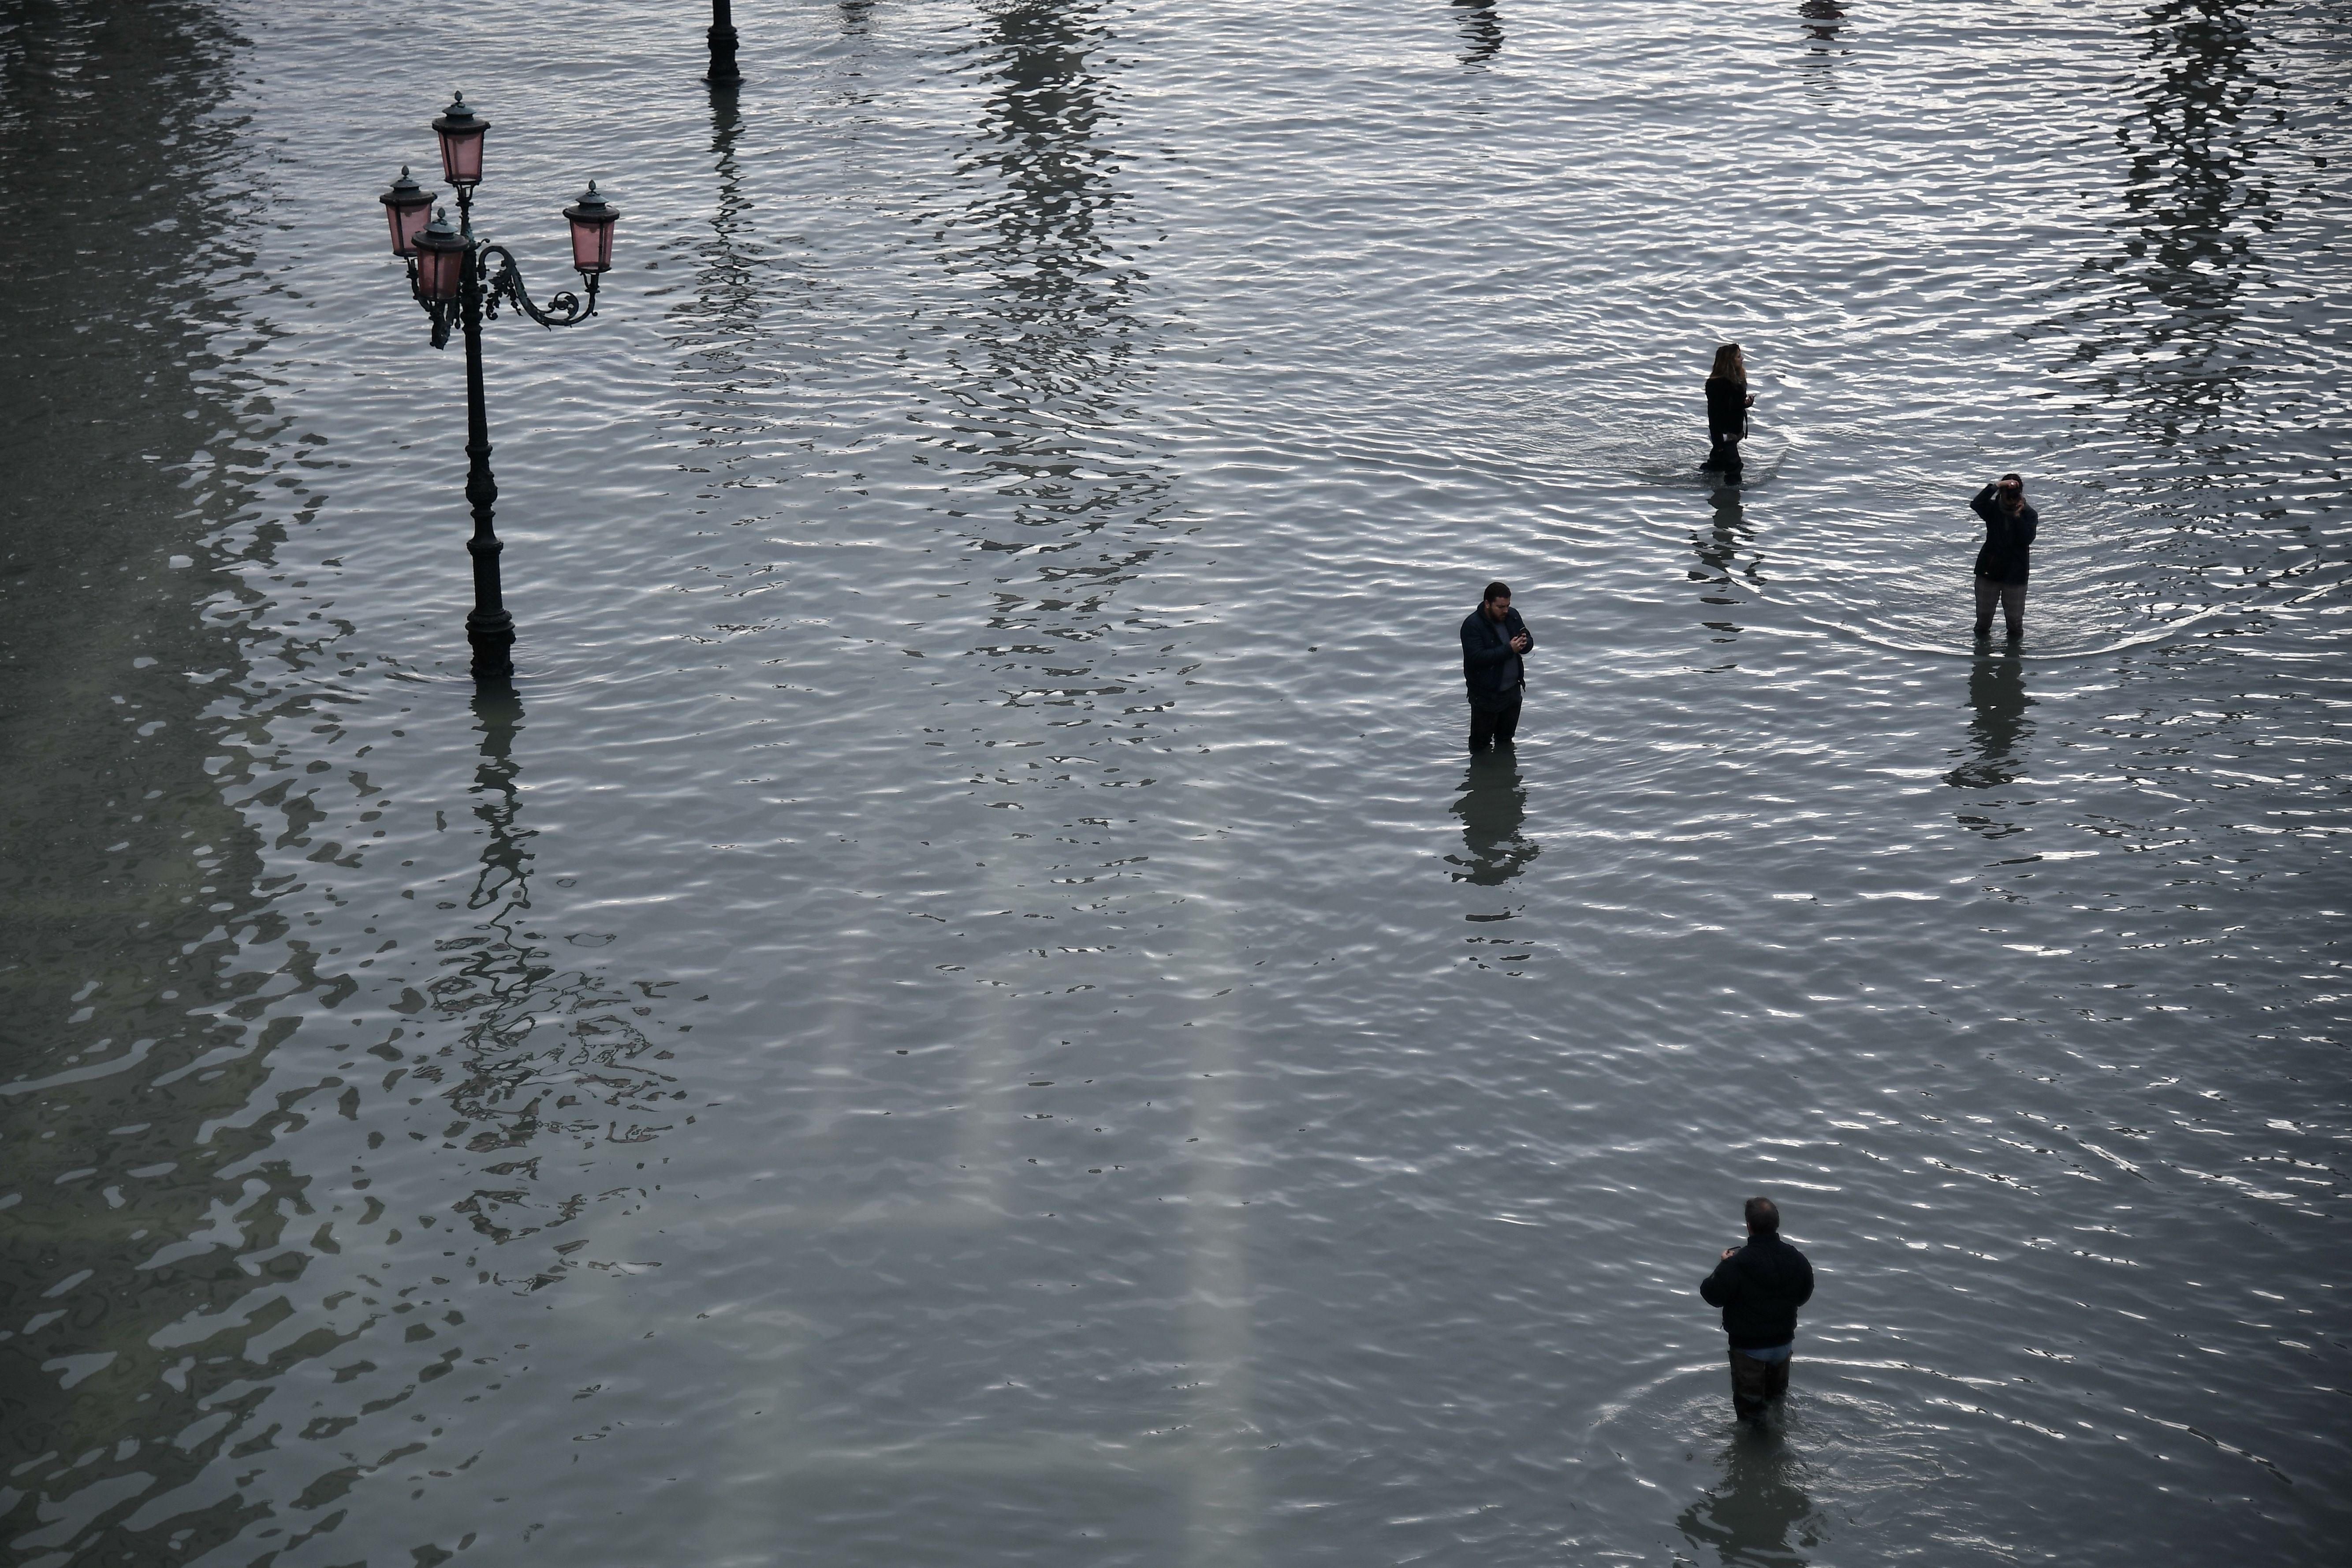 People take photos at the flooded St. Mark's Square.